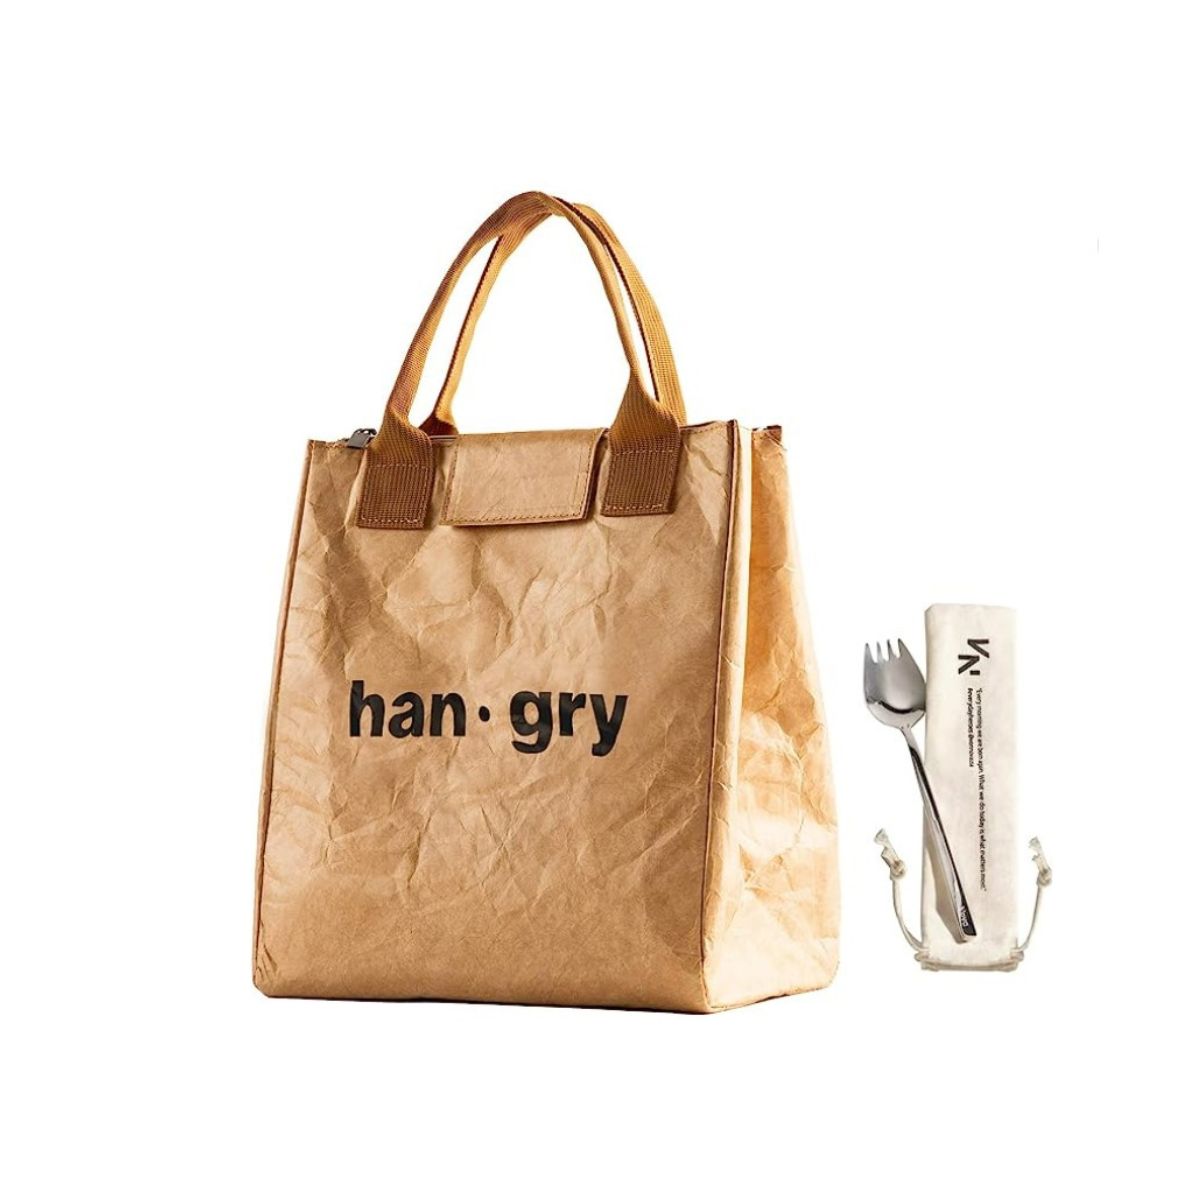 Paper-looking Tyvek insulated lunch box that says Hangry